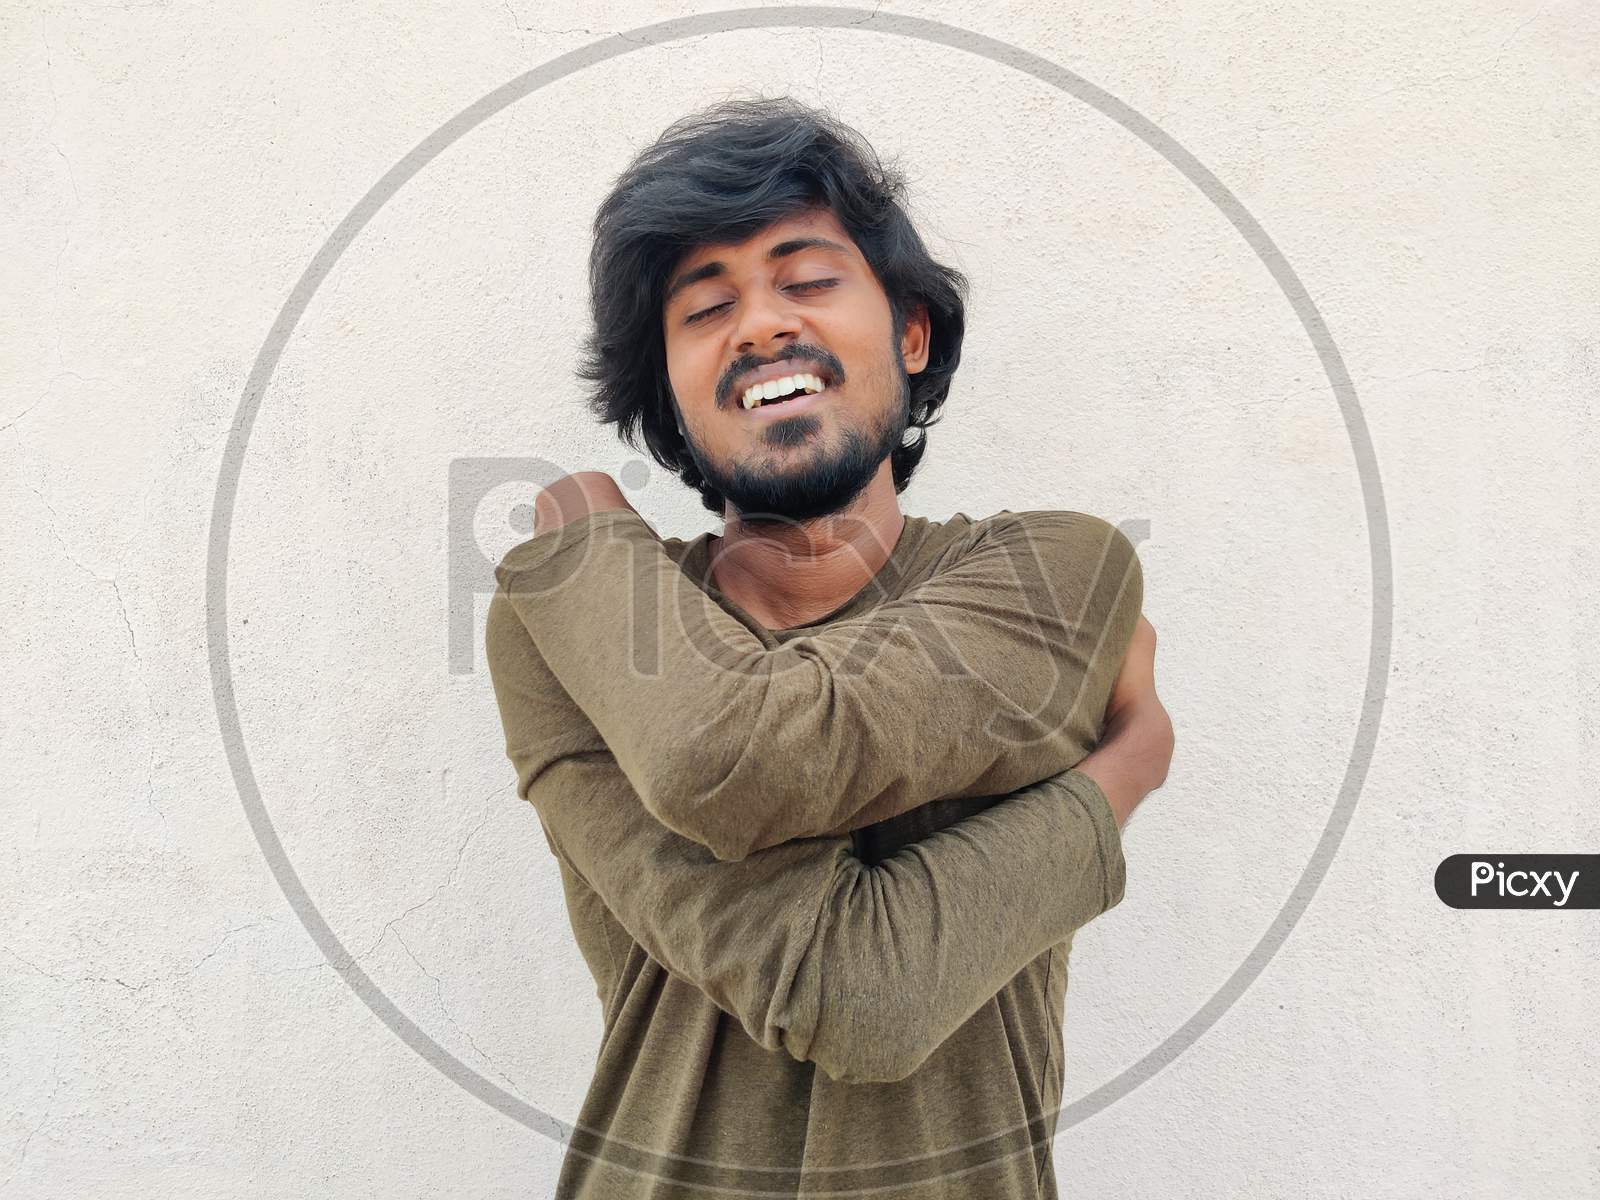 Young Smiling South Indian Tamil Man With Long Hairs, Beard Wearing Full Sleeves Is Hugging Himself Or Oneself. Self Care. White Background